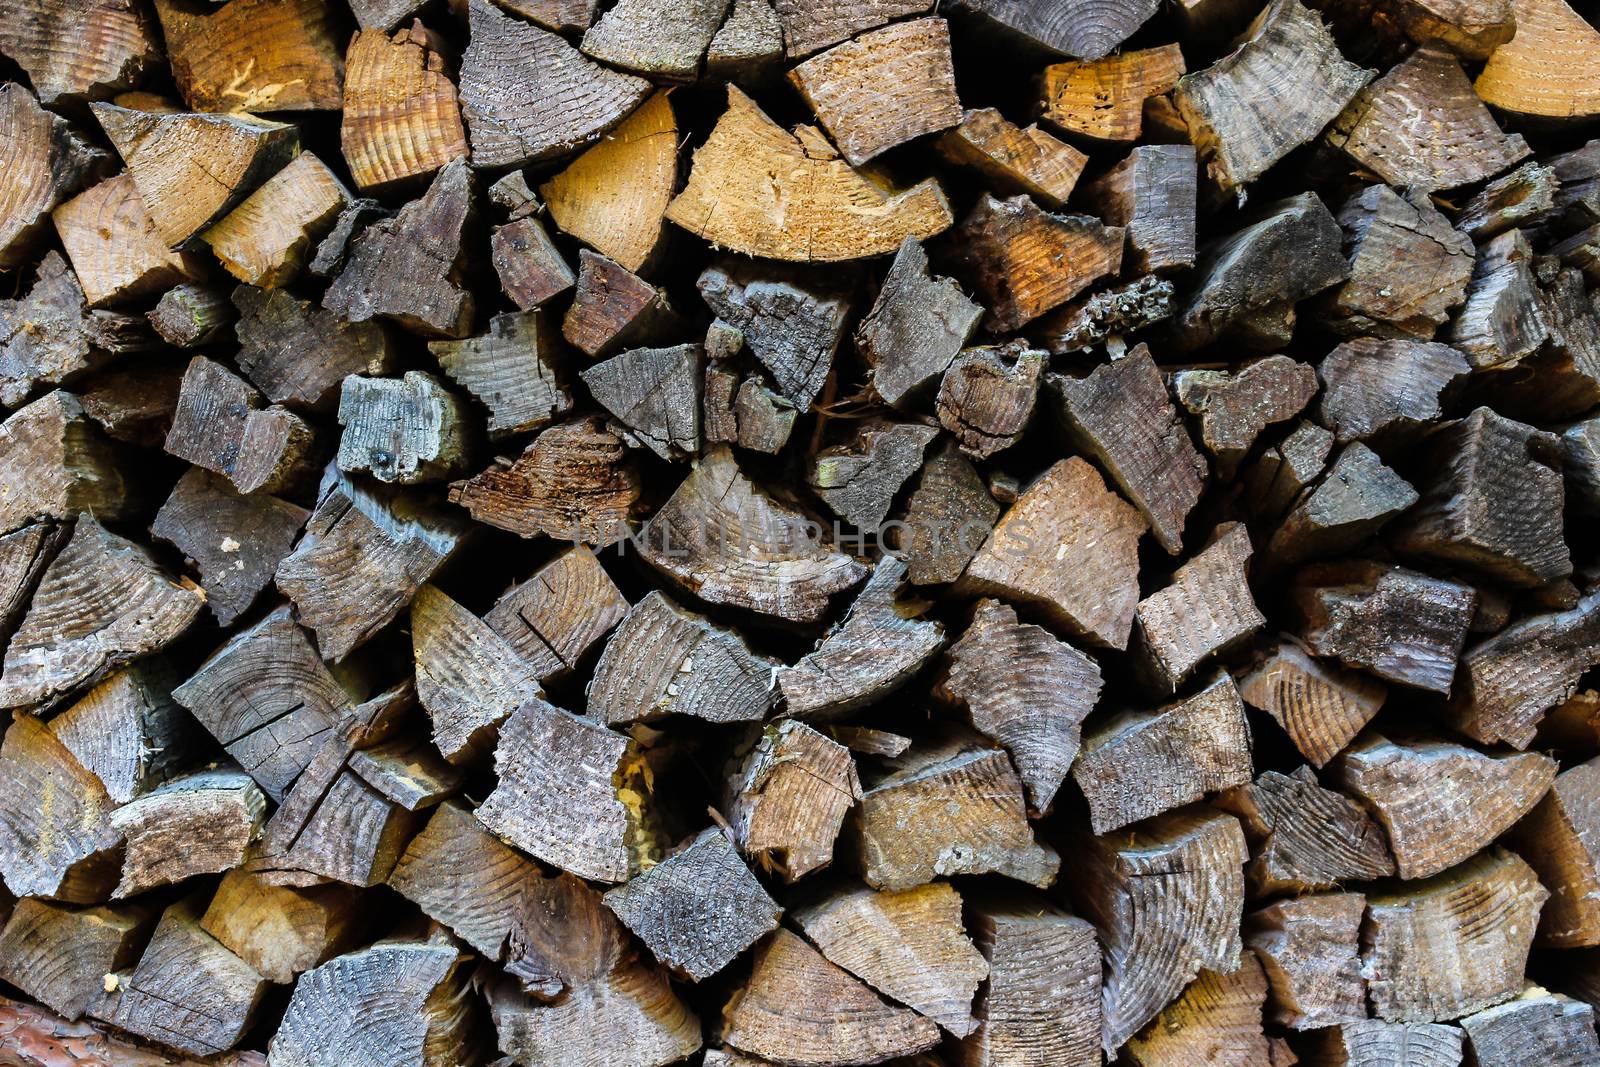 firewood, dry firewood in a pile for furnace kindling